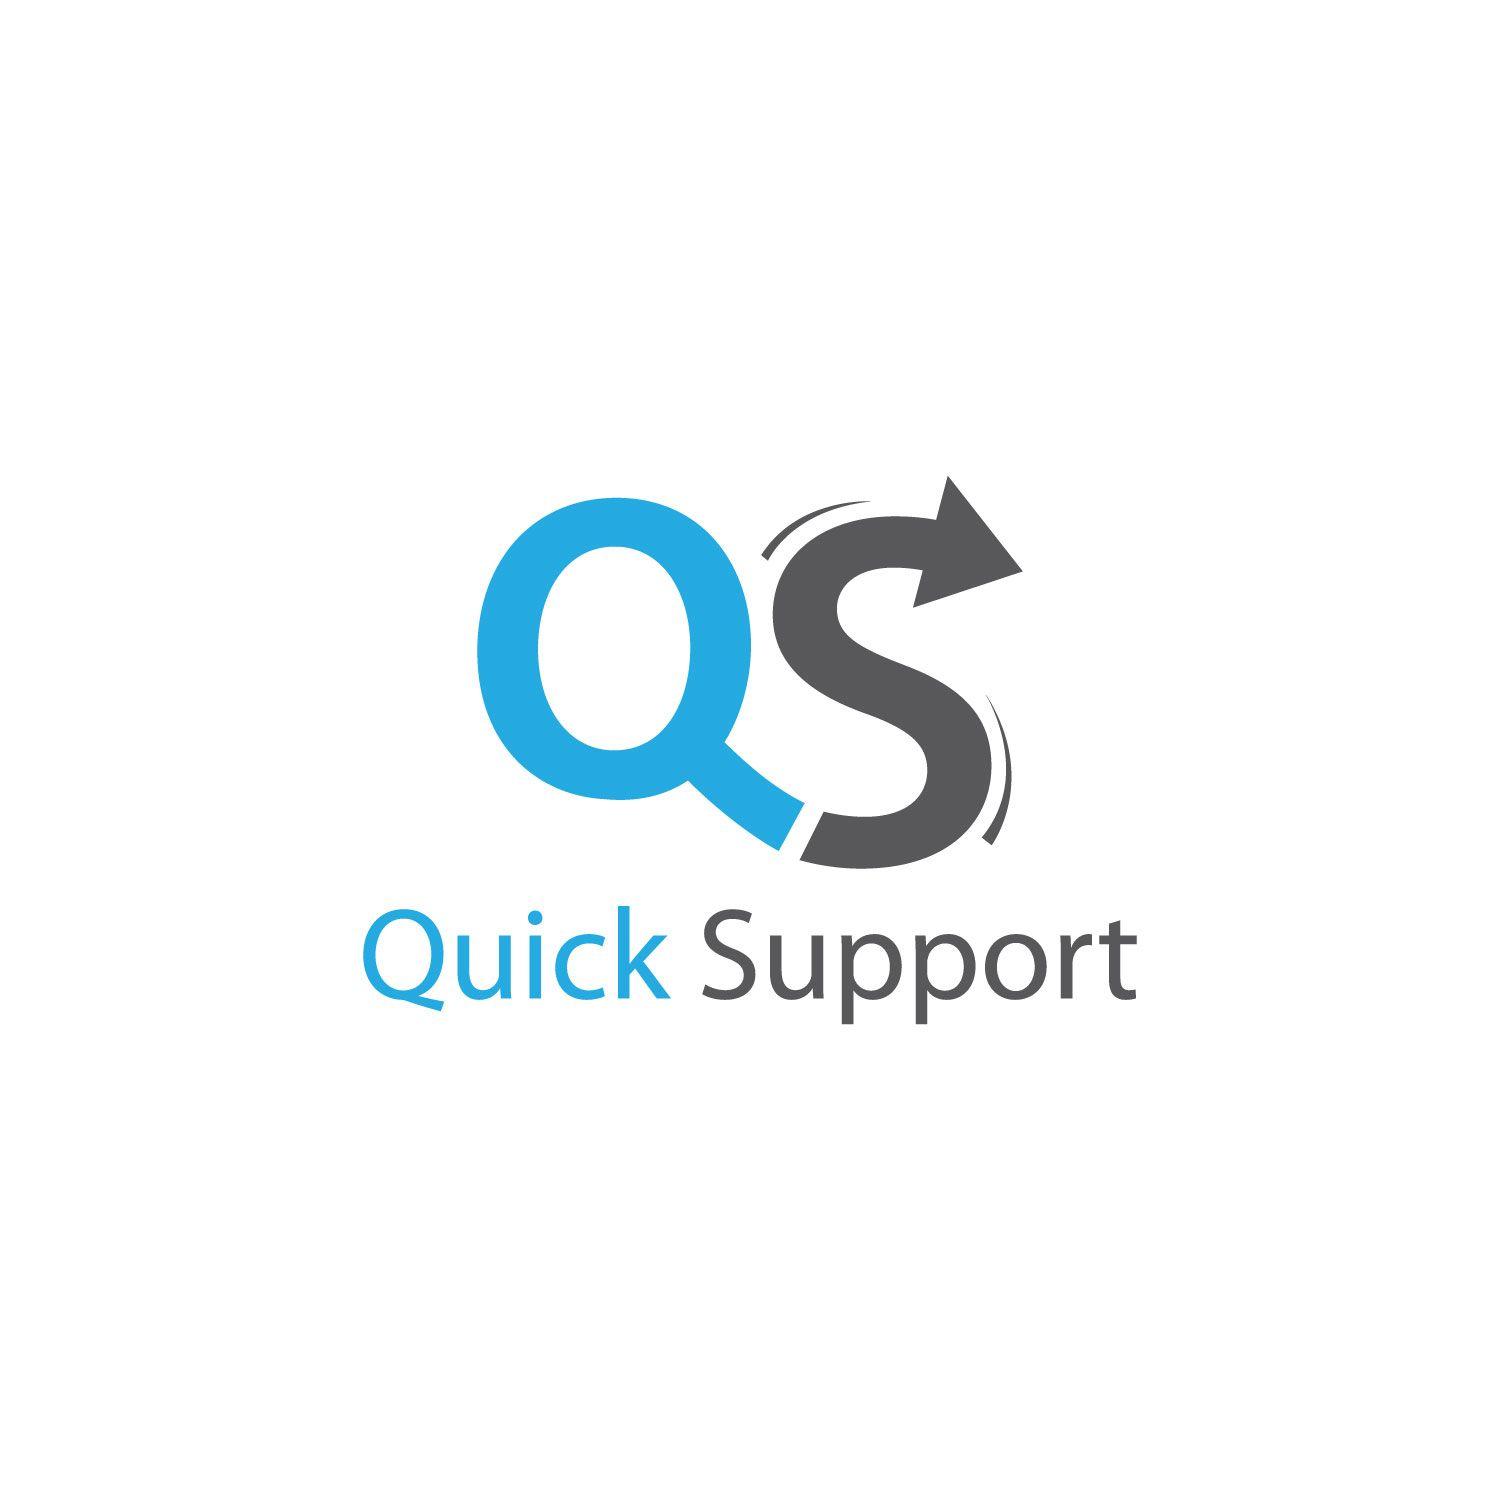 Colorful Computer Logo - Modern, Colorful, Computer Logo Design for Quick Support by 3S ...